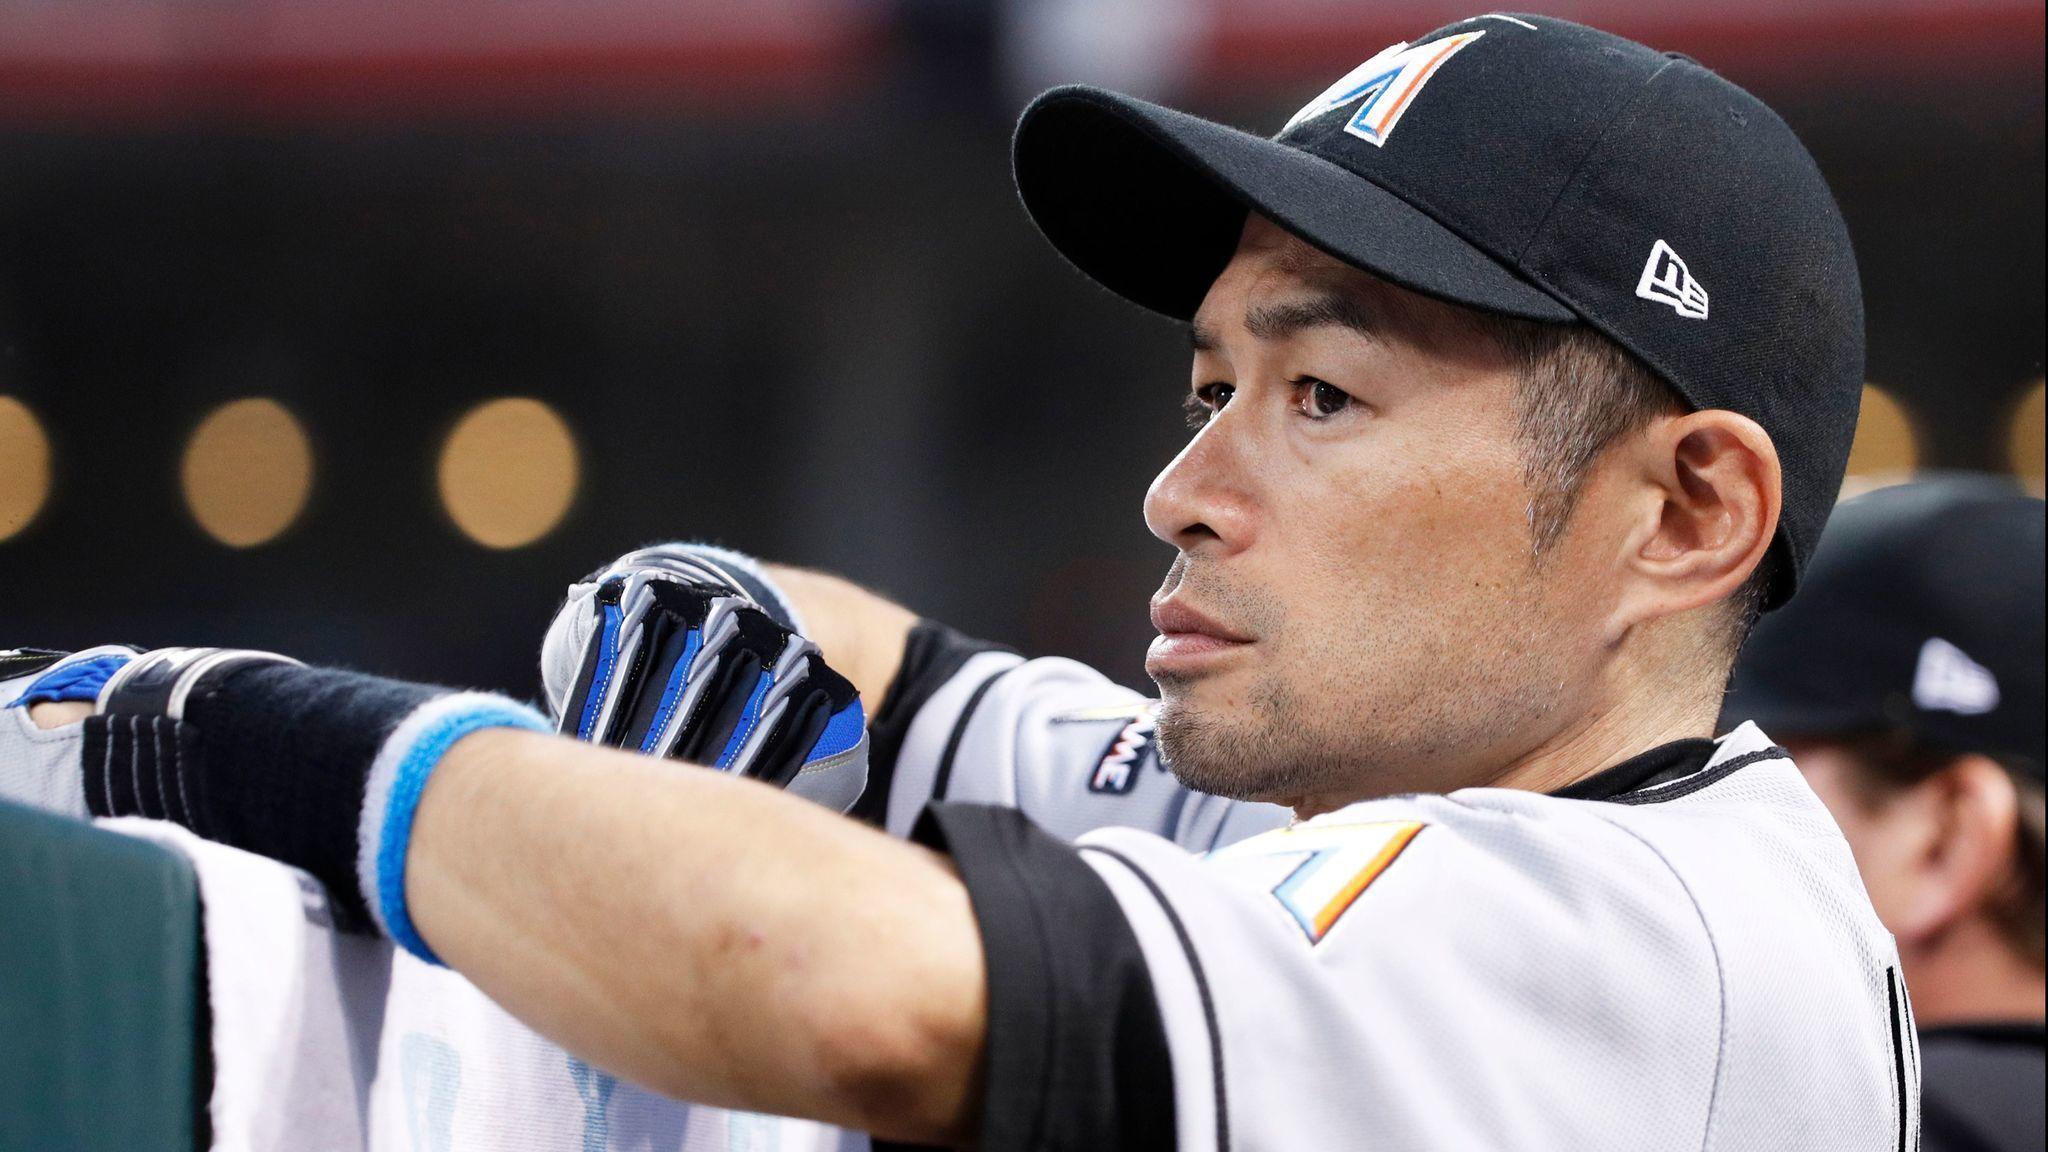 Ichiro Suzuki's lesson learned from the only major league game he